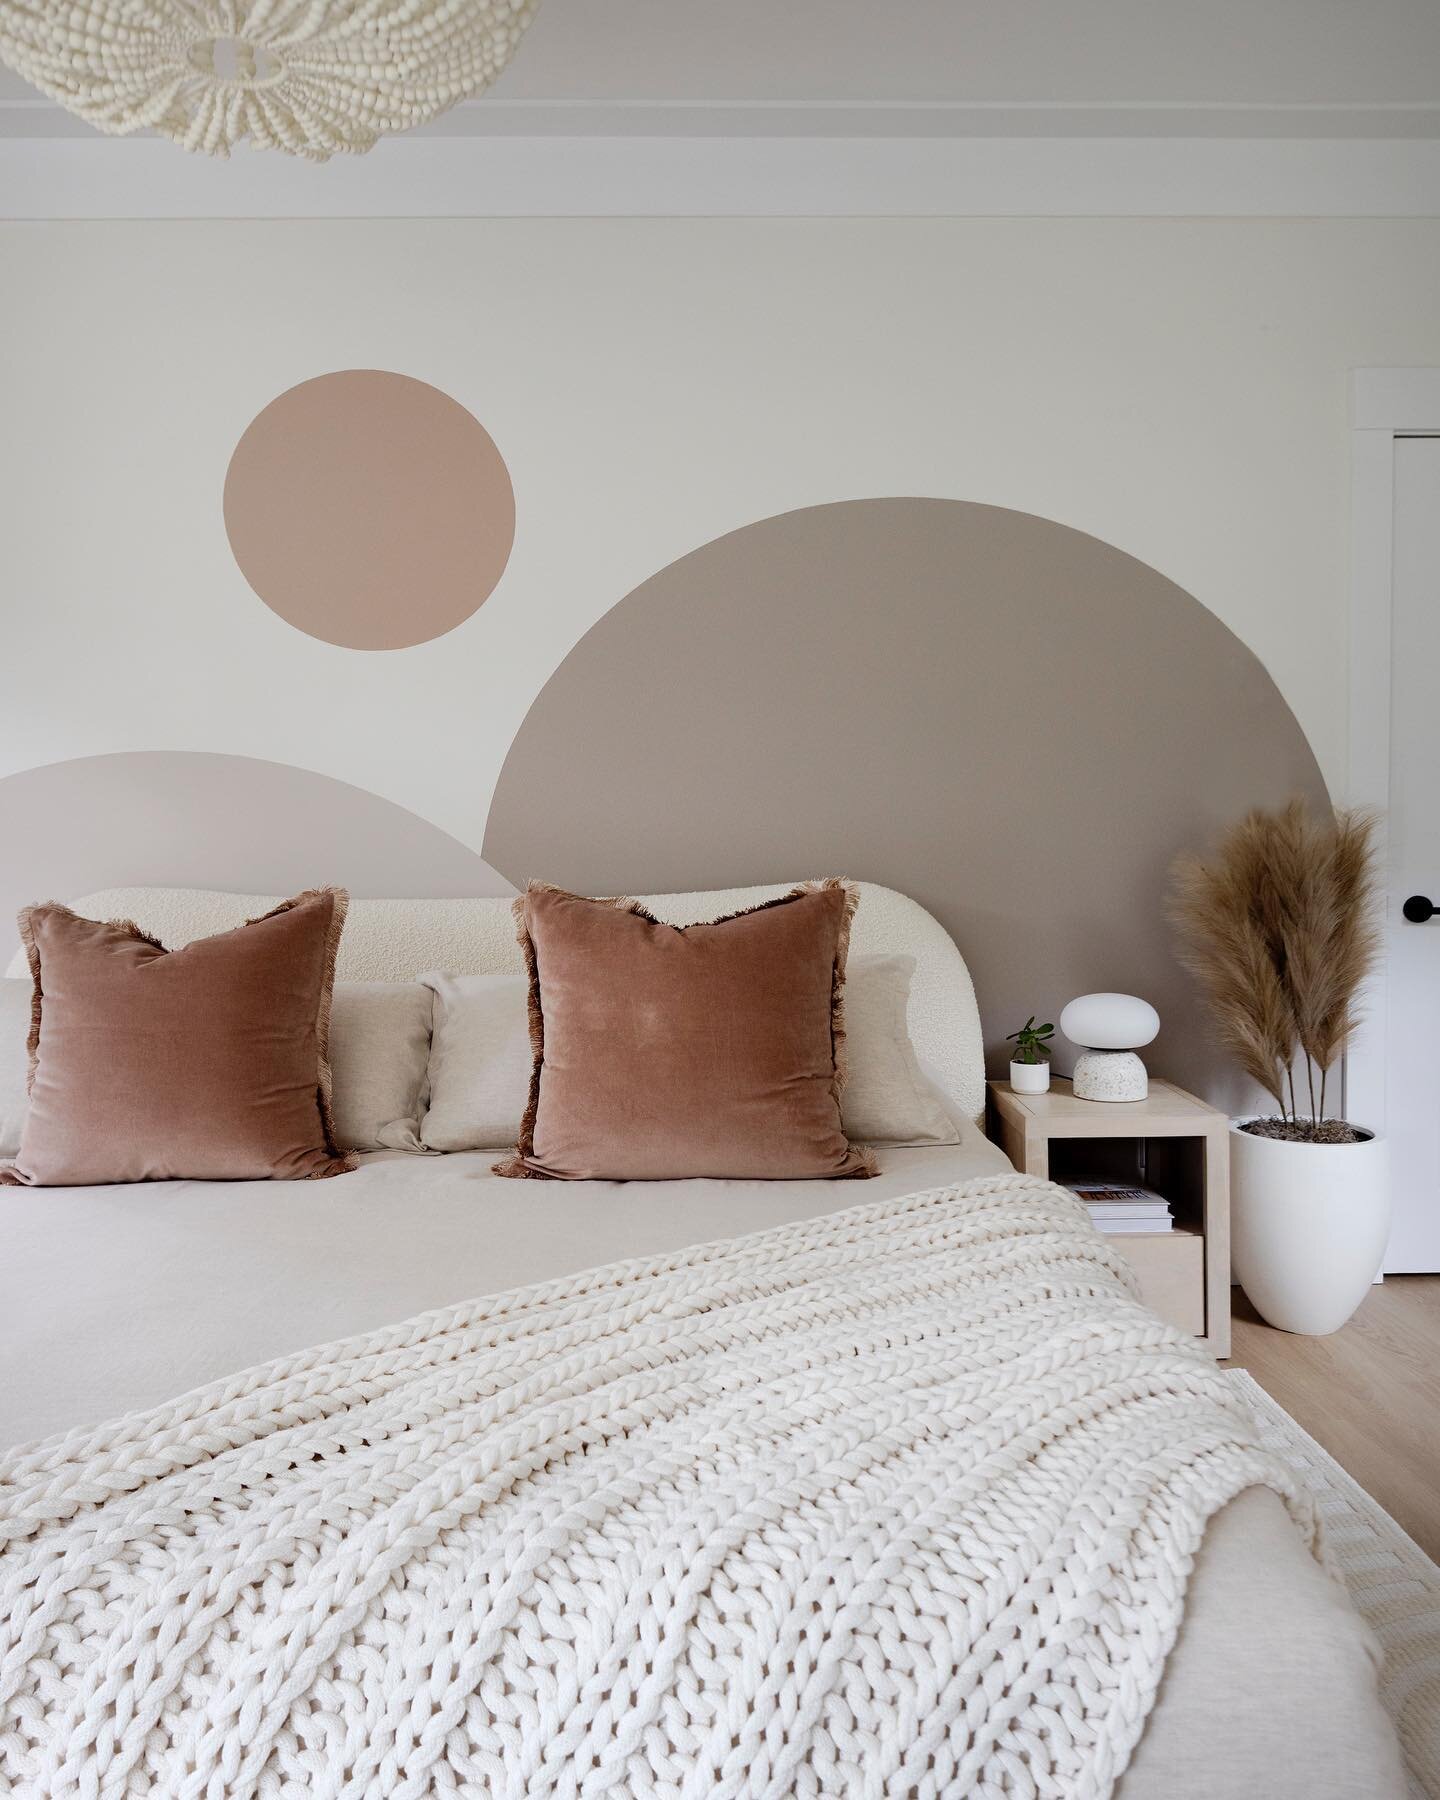 Where to find peace? Here📍

Photographer by: @janisnicolayphotography

#quintessentialliving #lindalaminteriordesign #interiordesigner #interiordesignvancouver #bedroomgoals #bedroomdecor #loveyourspace #homedecor #potterybarn #urbanbarn #mycb2 #cb2